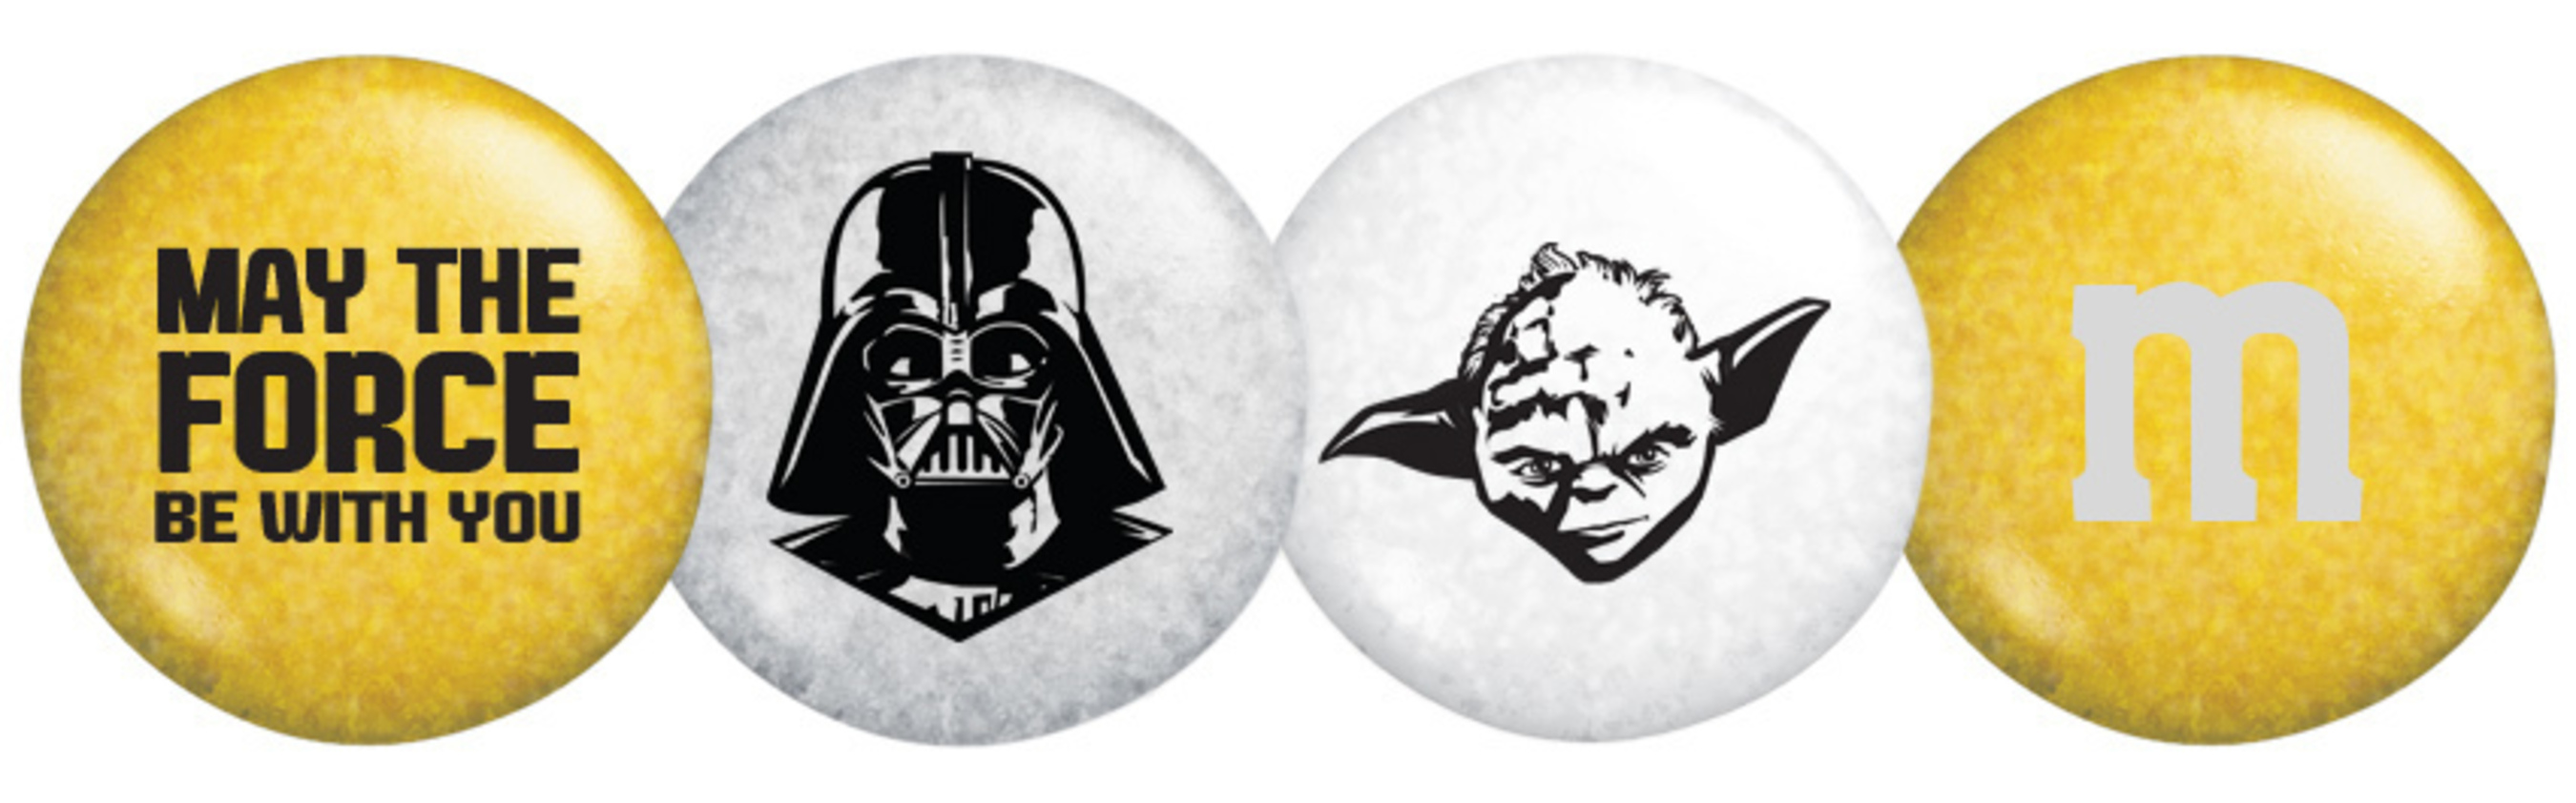 MY M&M'S(R) releases Star Wars-themed MY M&M'S chocolate candies to celebrate 'May the 4th'. Products include special M&M'S blends featuring well-known Star Wars phrases and characters, like Darth Vader and Yoda, along with unique merchandise like candy dispensers, favor tins, gift boxes and more (PRNewsFoto/Mars Retail Group)